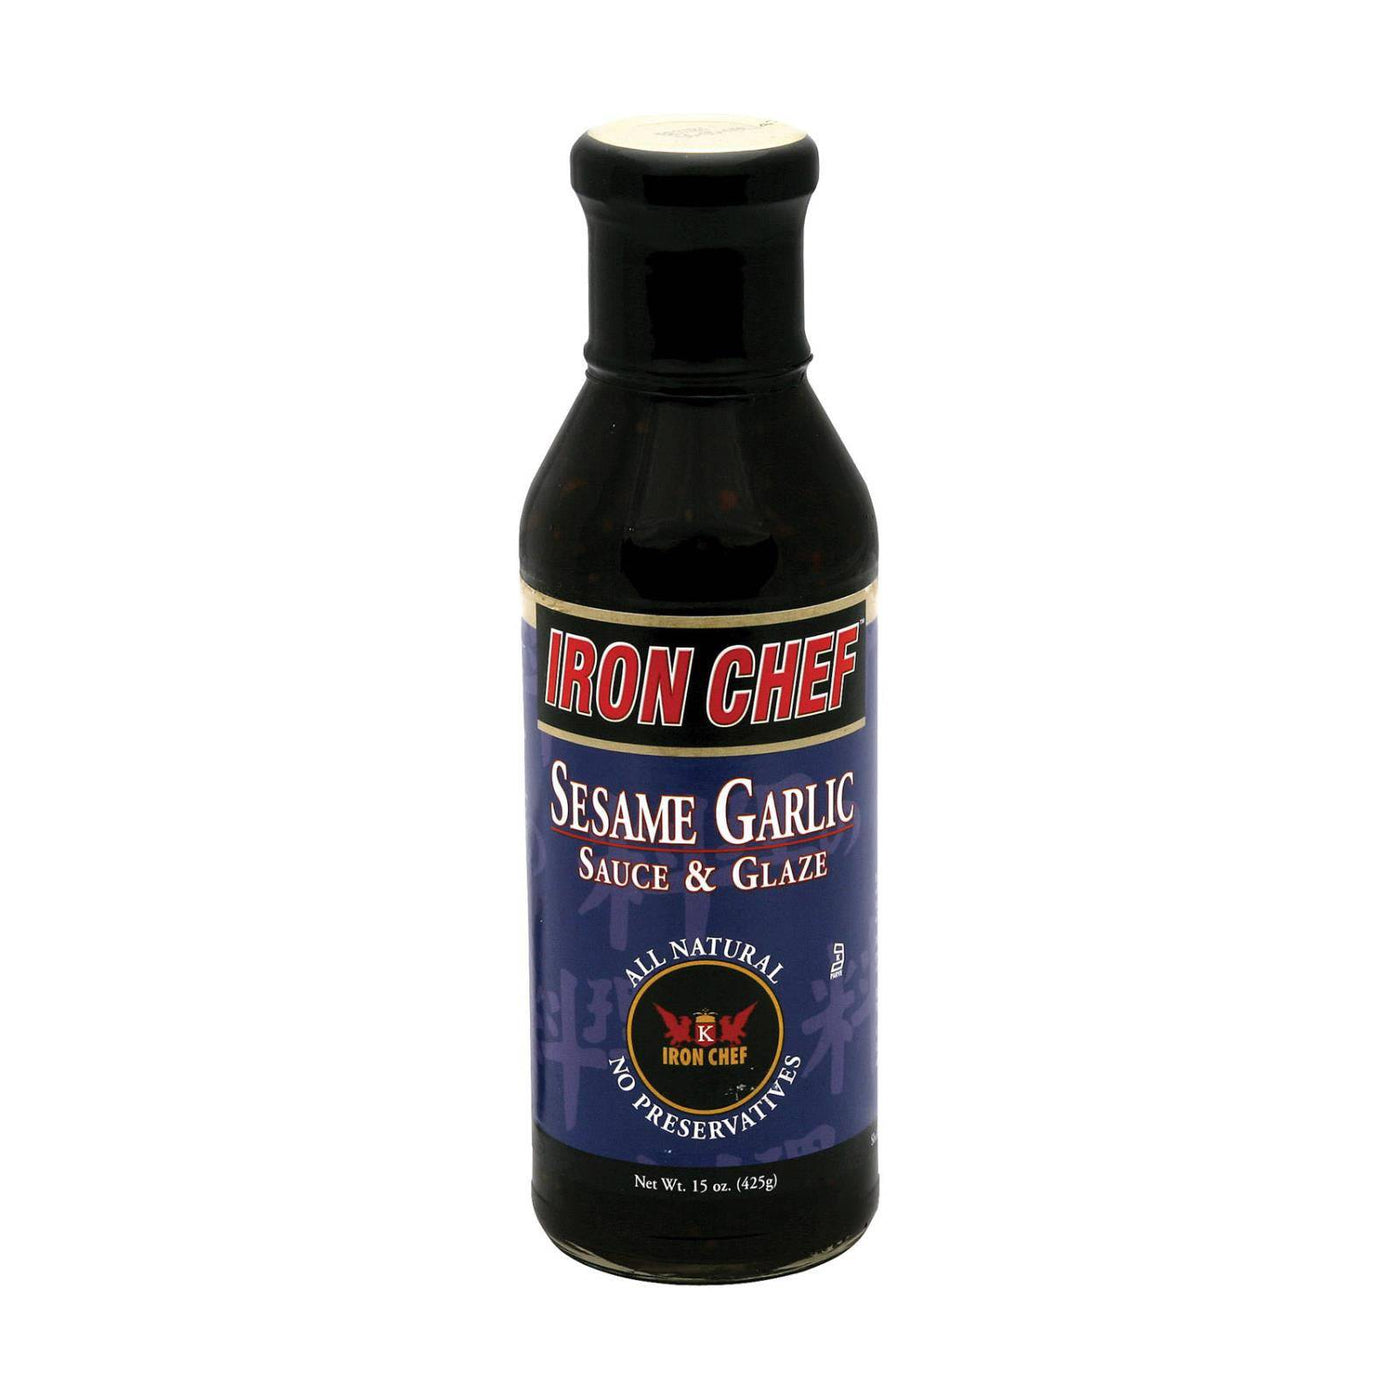 Iron Chef Sauce And Glaze - Sesame Garlic - Case Of 6 - 15 Oz. | OnlyNaturals.us